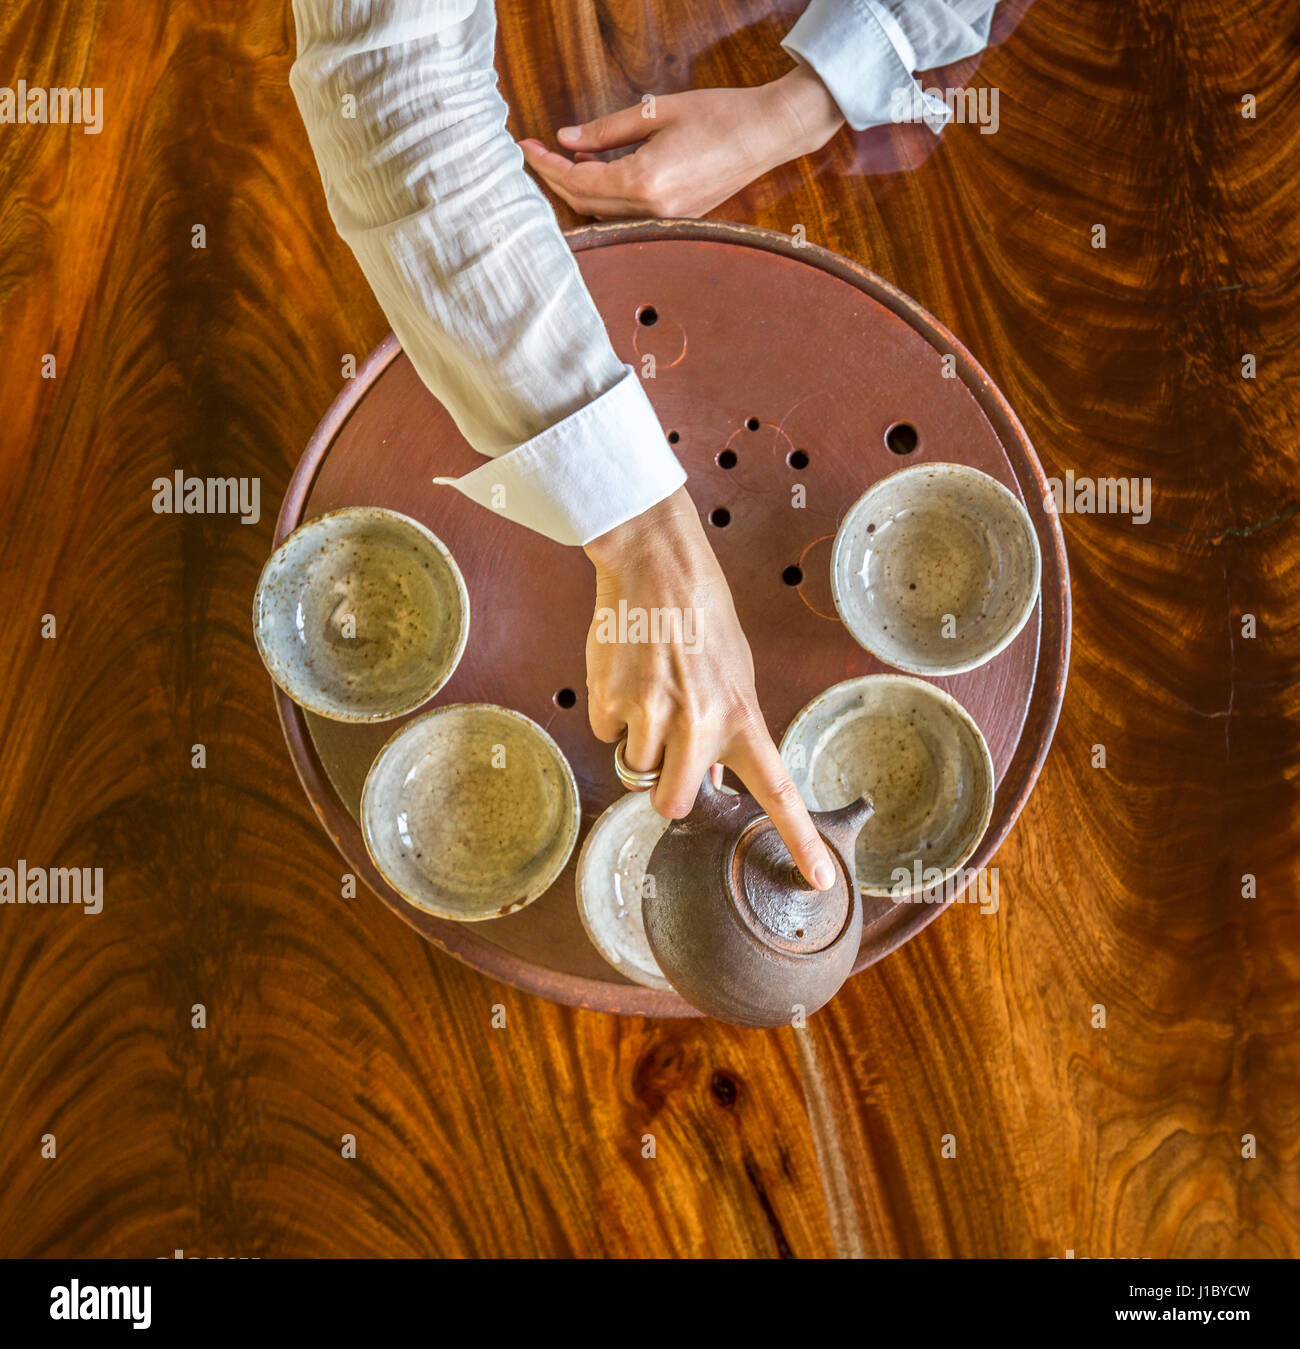 Top down view from above of Sarah Heddin's hands pouring tea into a ceramic pot on a tray with tea cups. Stock Photo